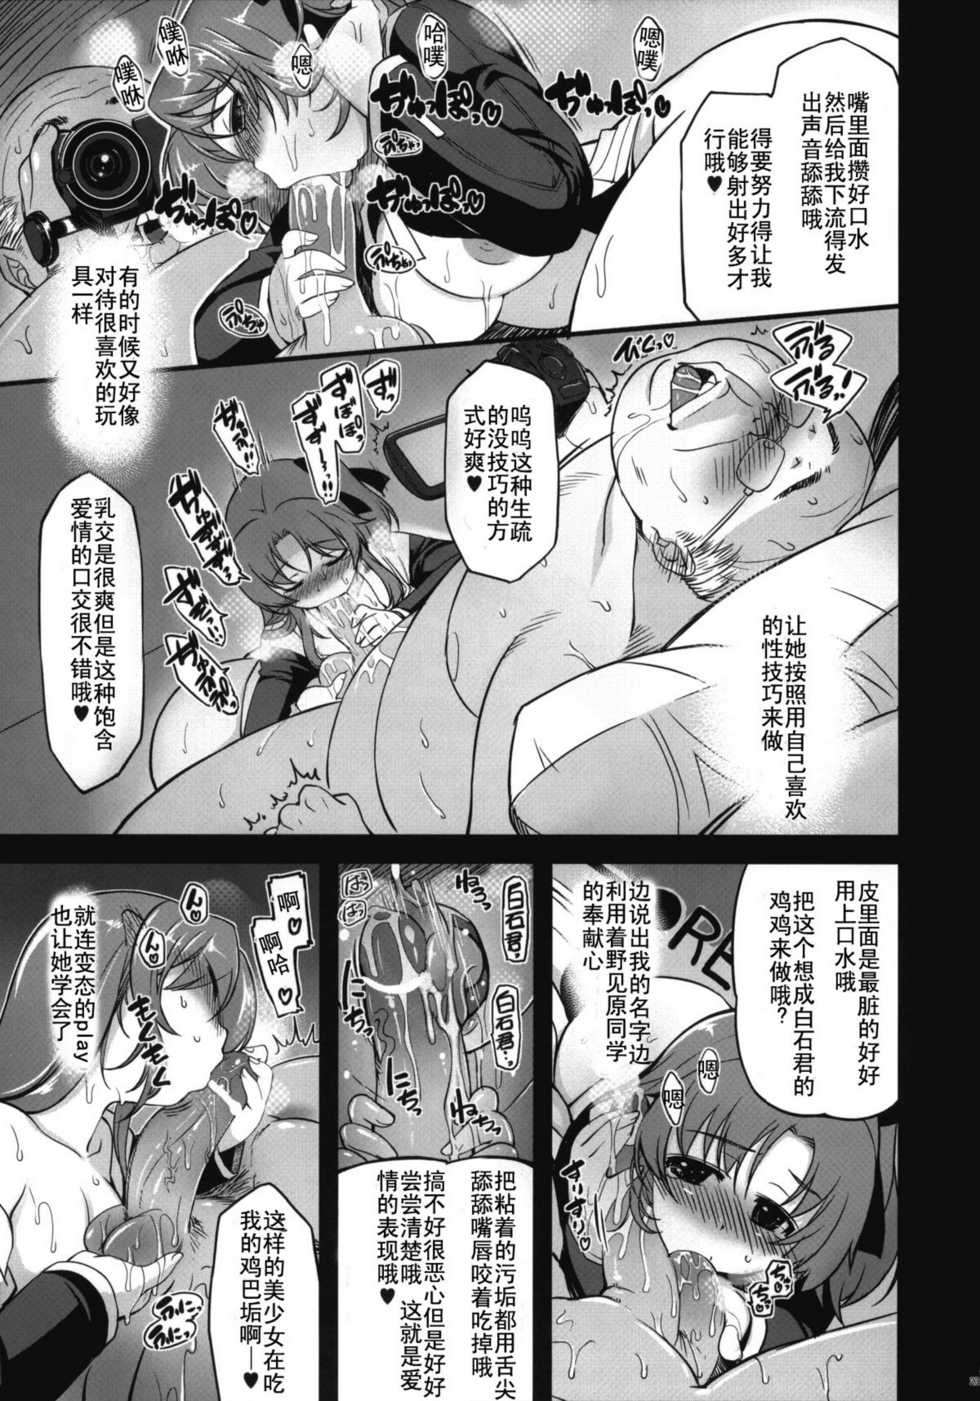 (C81) [Xration (mil)] MIXED-REAL 4 (Zeroin) [Chinese] [渣渣汉化组] - Page 23